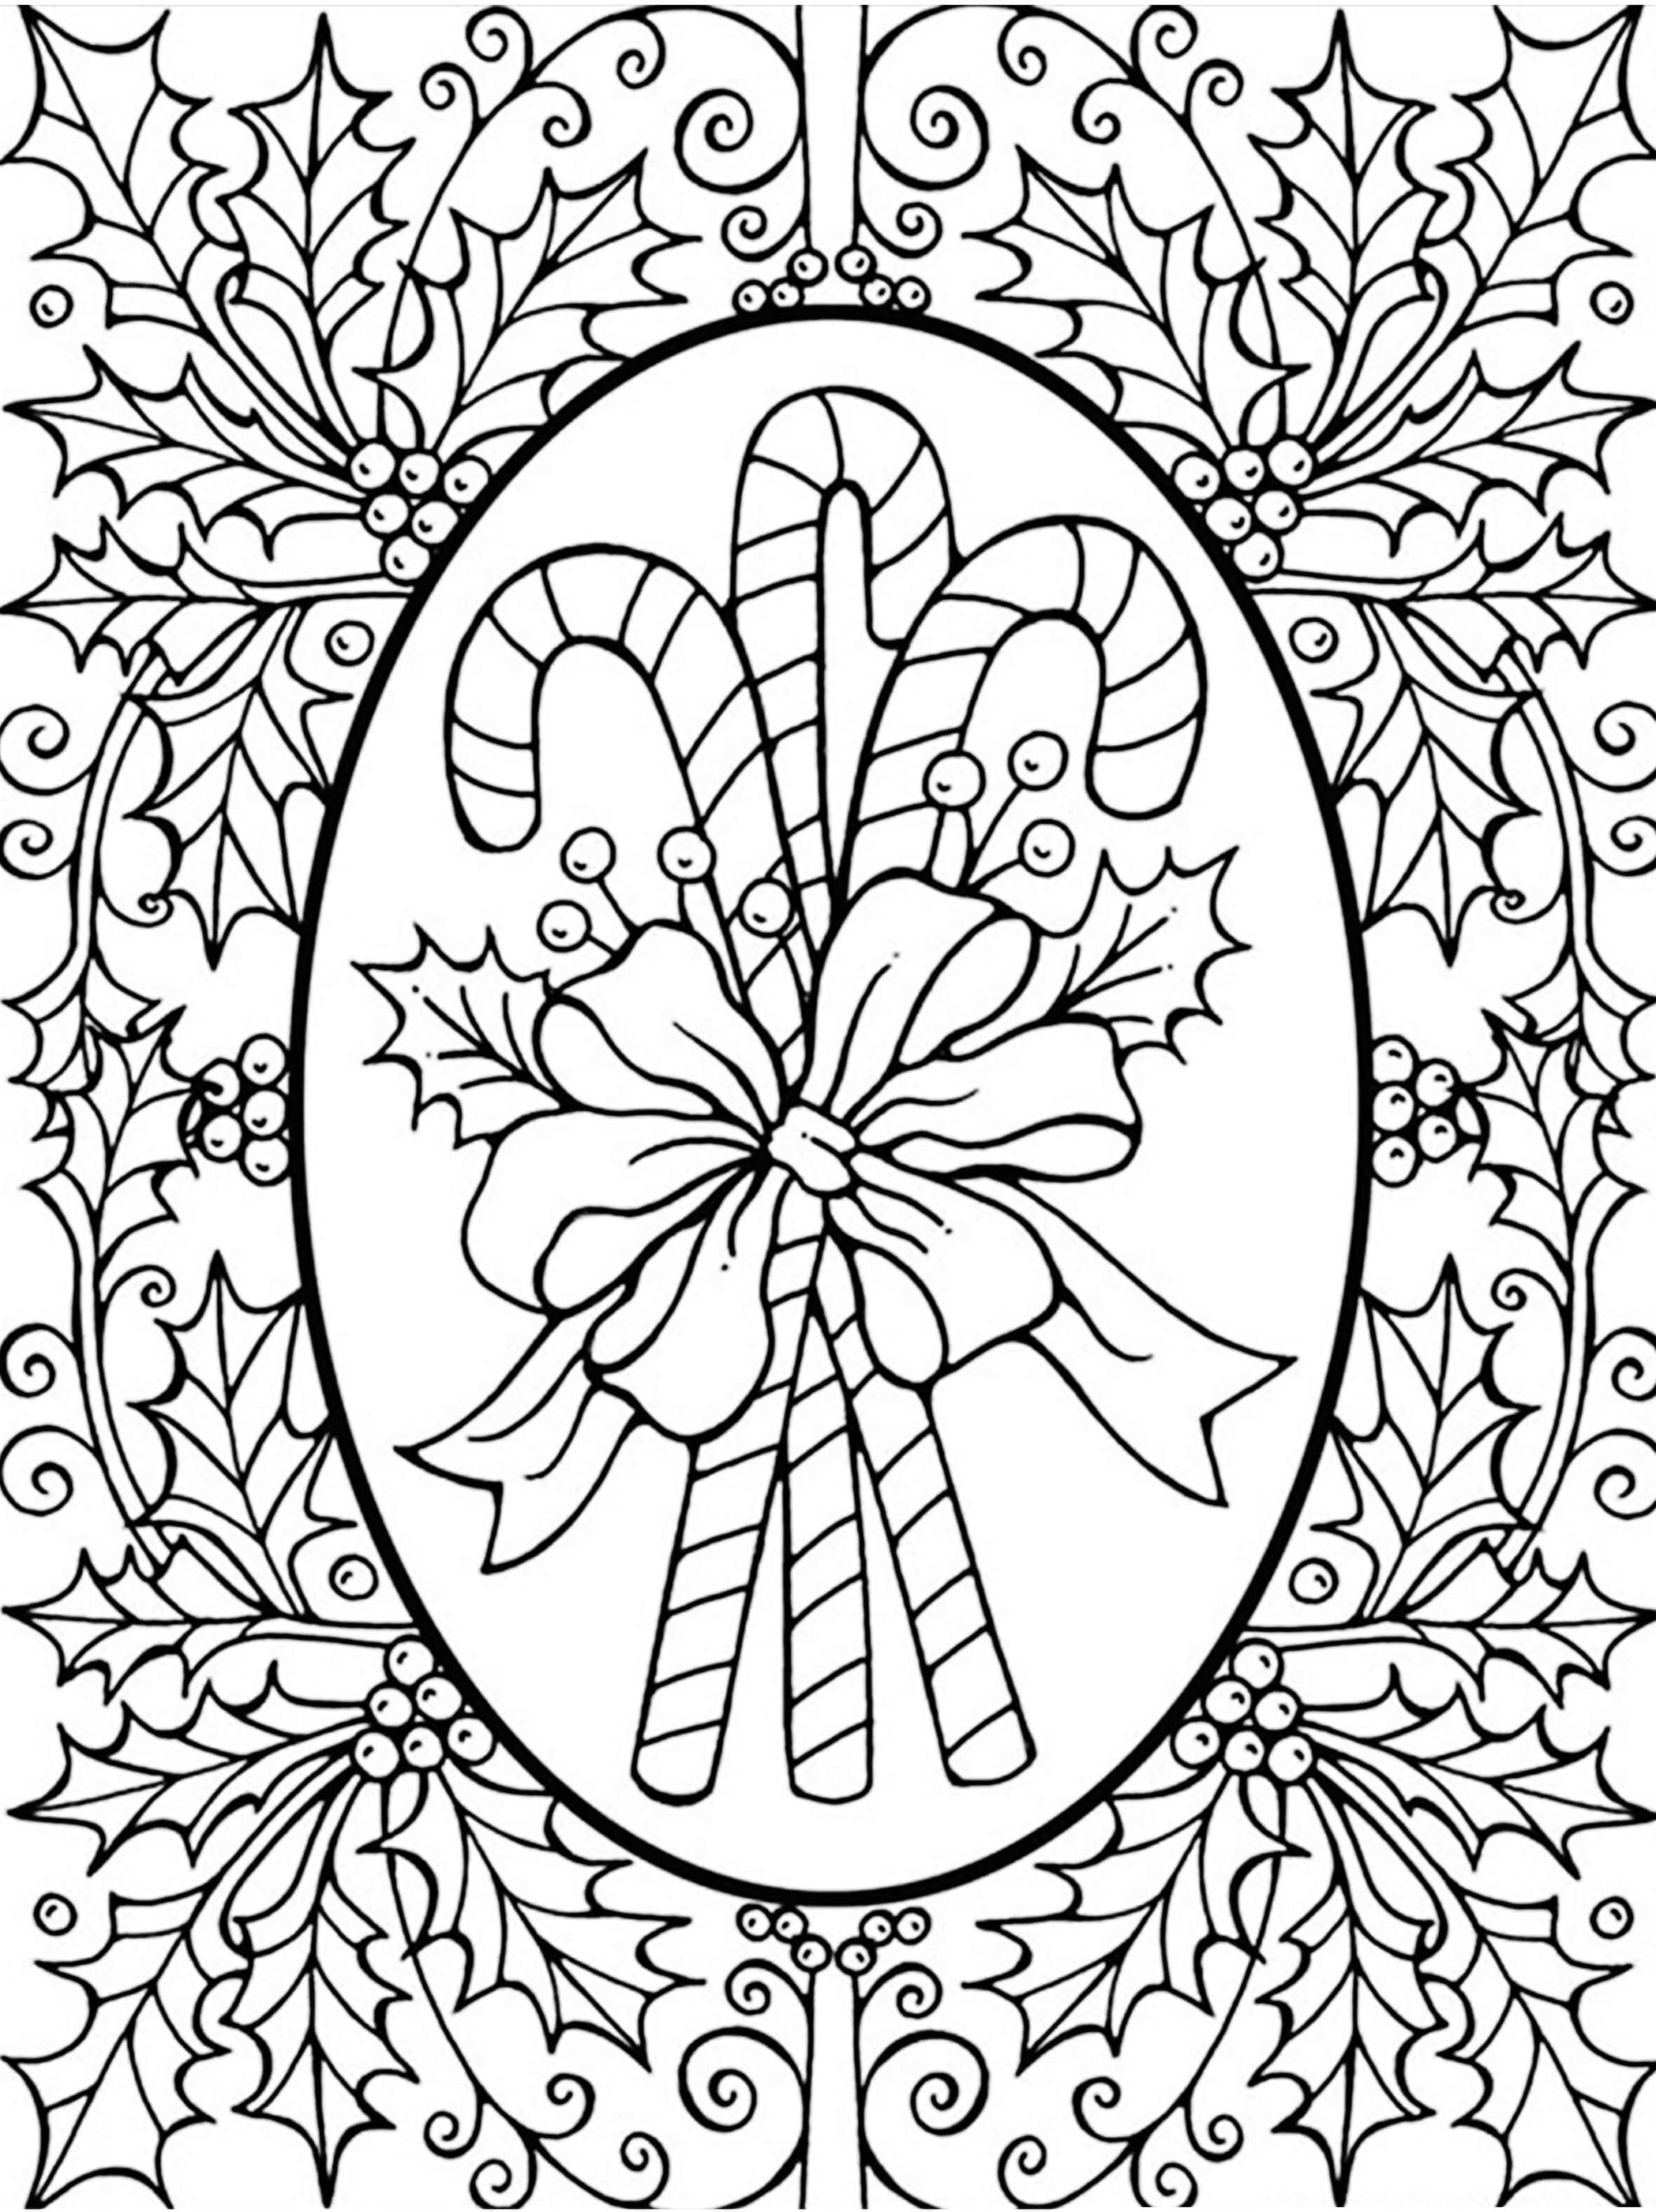 Greeting Card With New Year’s Candies Coloring Page